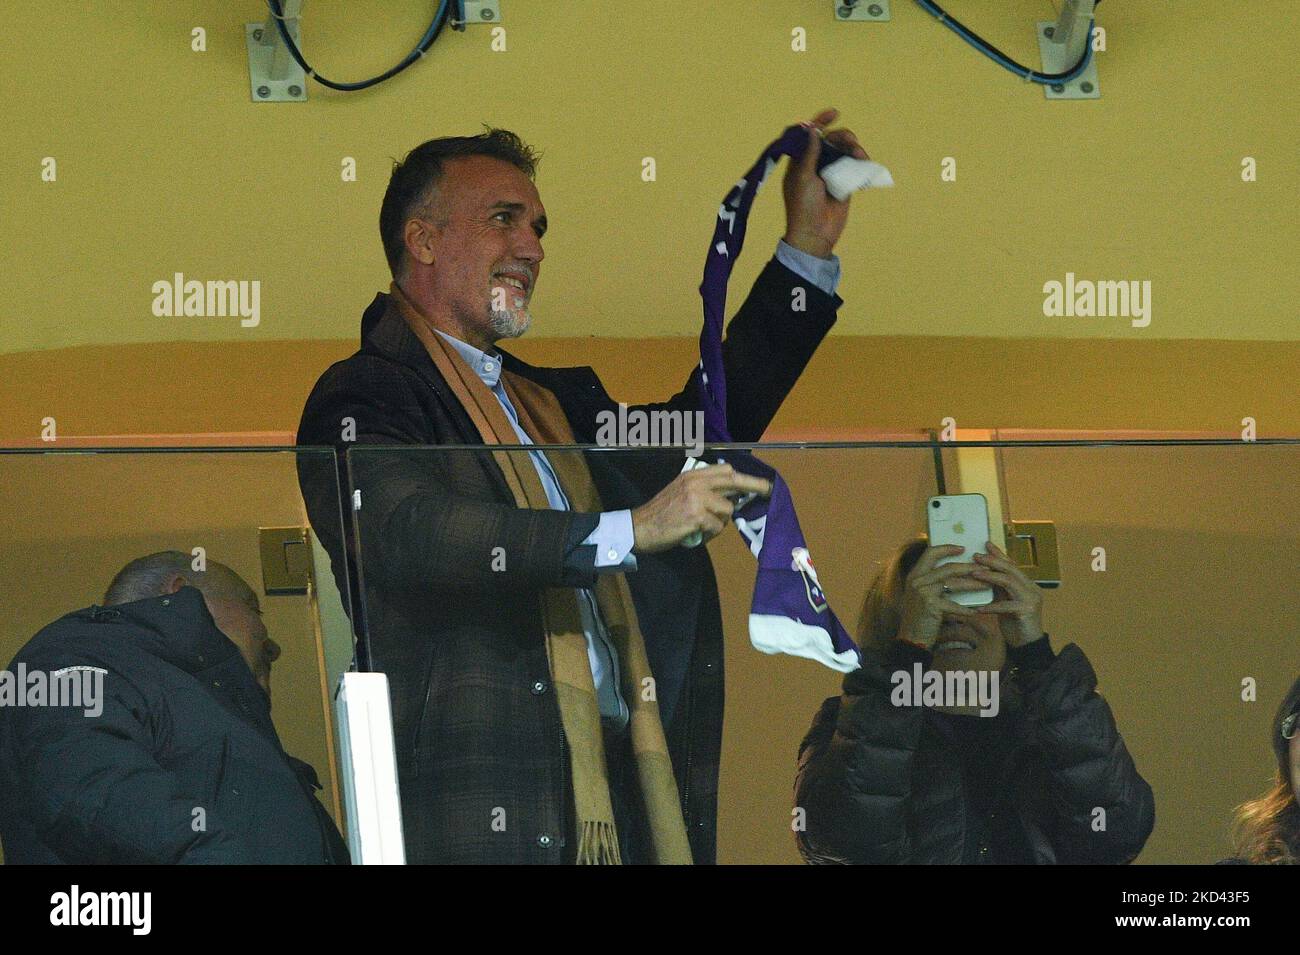 ACF Fiorentina former player Gabriel Omar Batistuta on the stand during the Coppa Italia Semi Final 1st Leg match between ACF Fiorentina and FC Juventus at Stadio Artemio Franchi, Florence, Italy on 2 March 2022. (Photo by Giuseppe Maffia/NurPhoto) Stock Photo